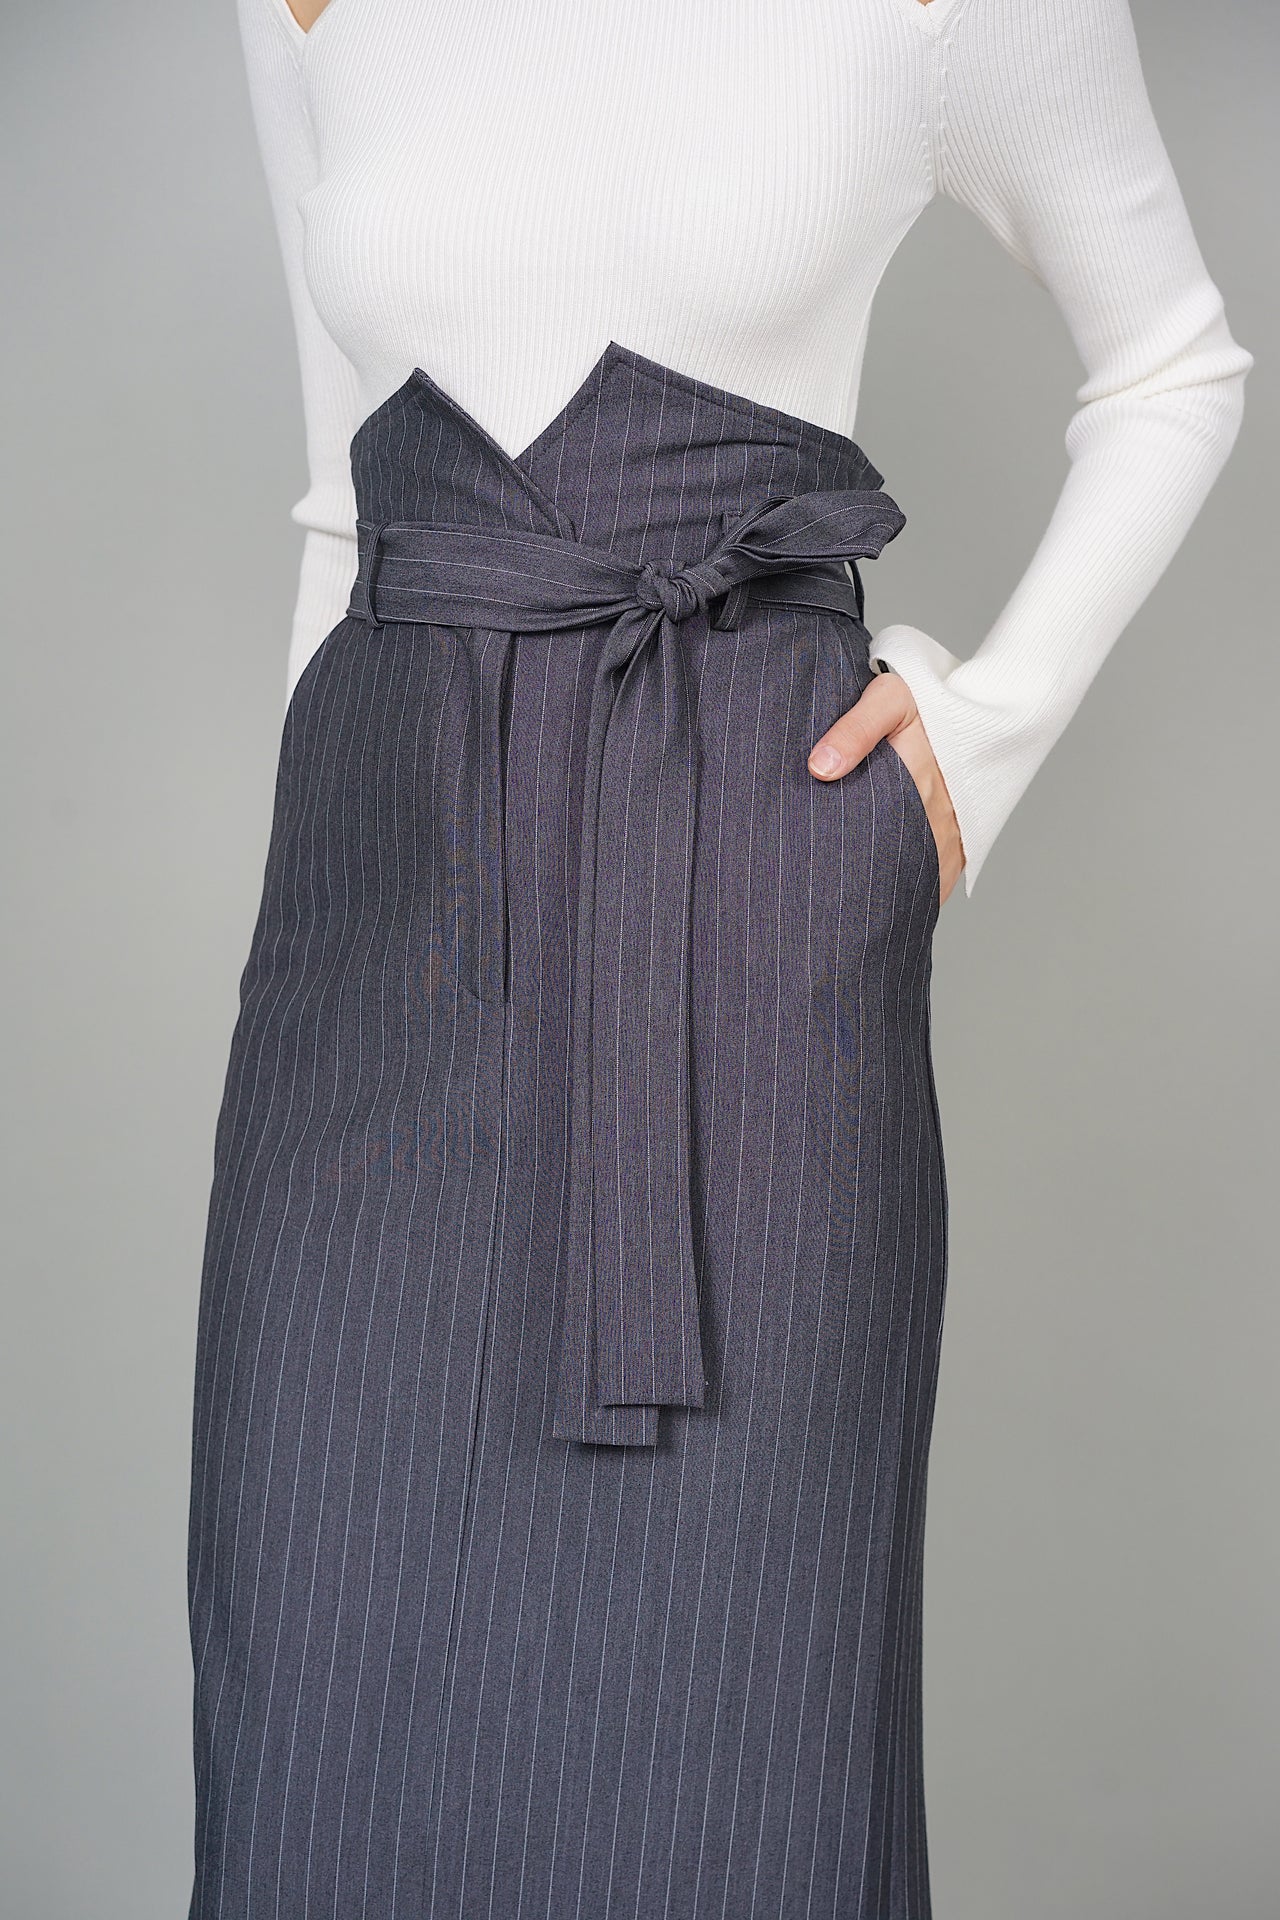 Addison Belted Long Skirt in Grey Pinstripes